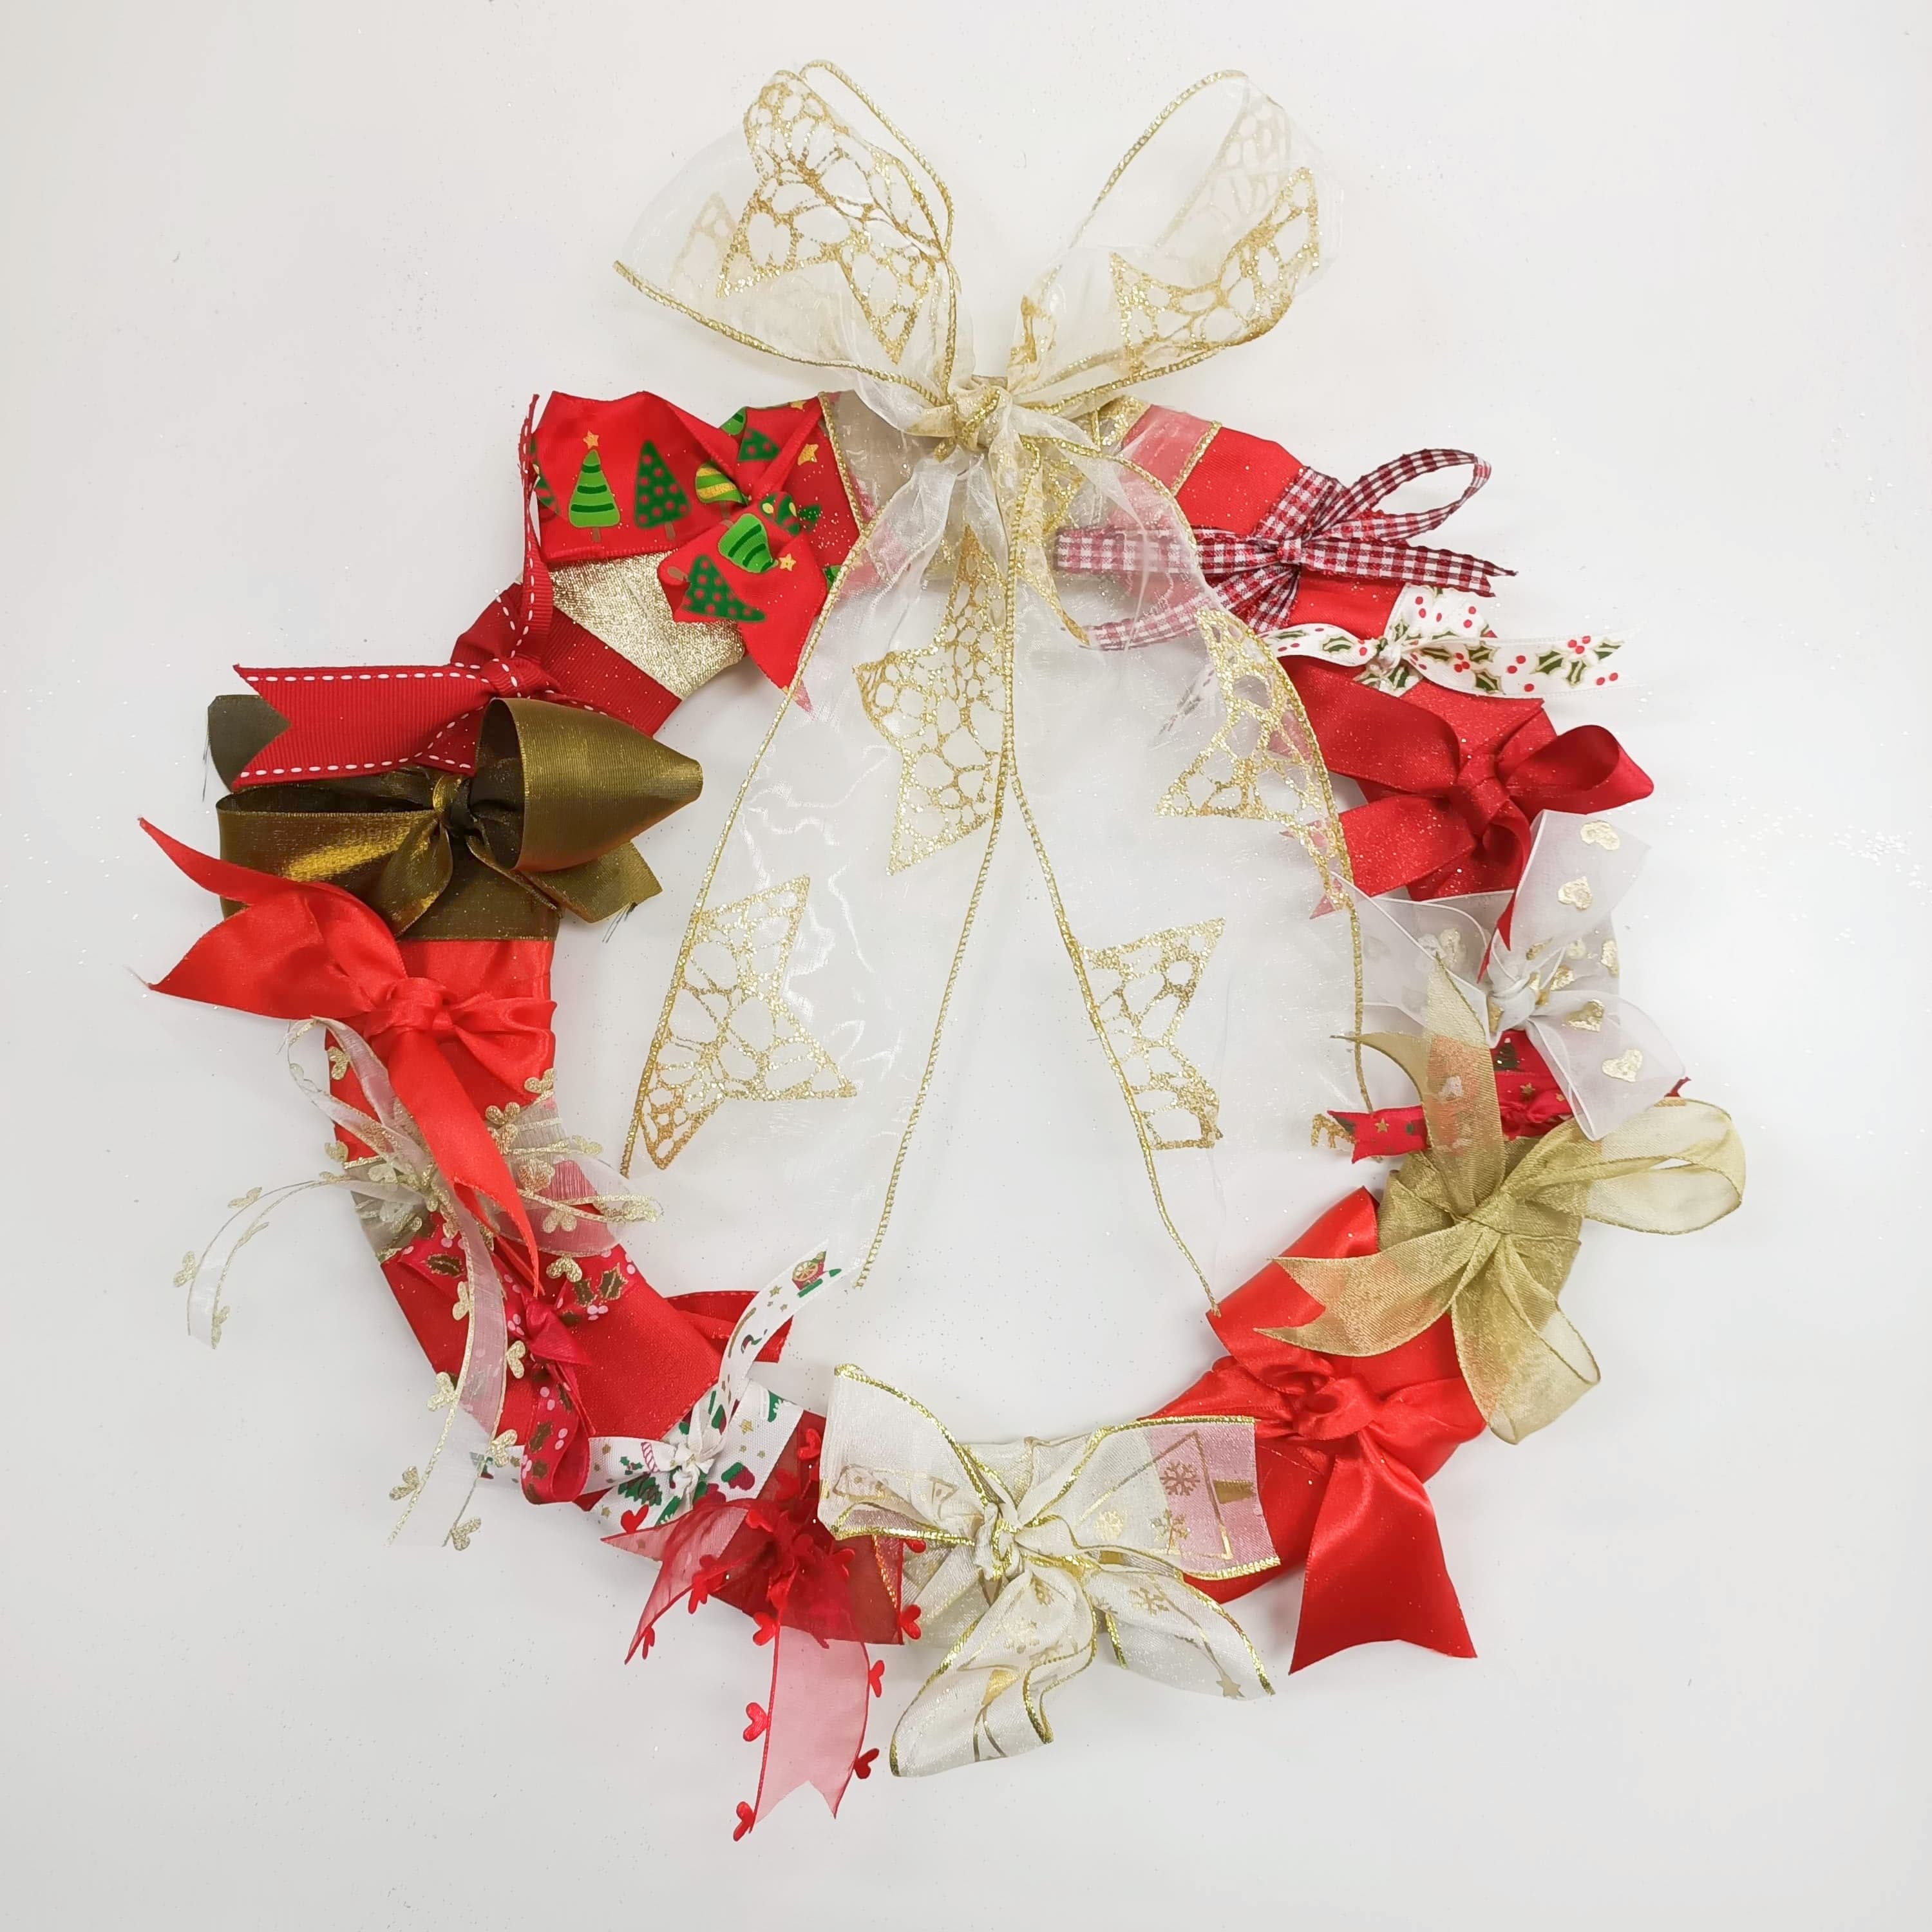 Get Christmas Tree Ribbon Online, Wired Christmas Ribbons